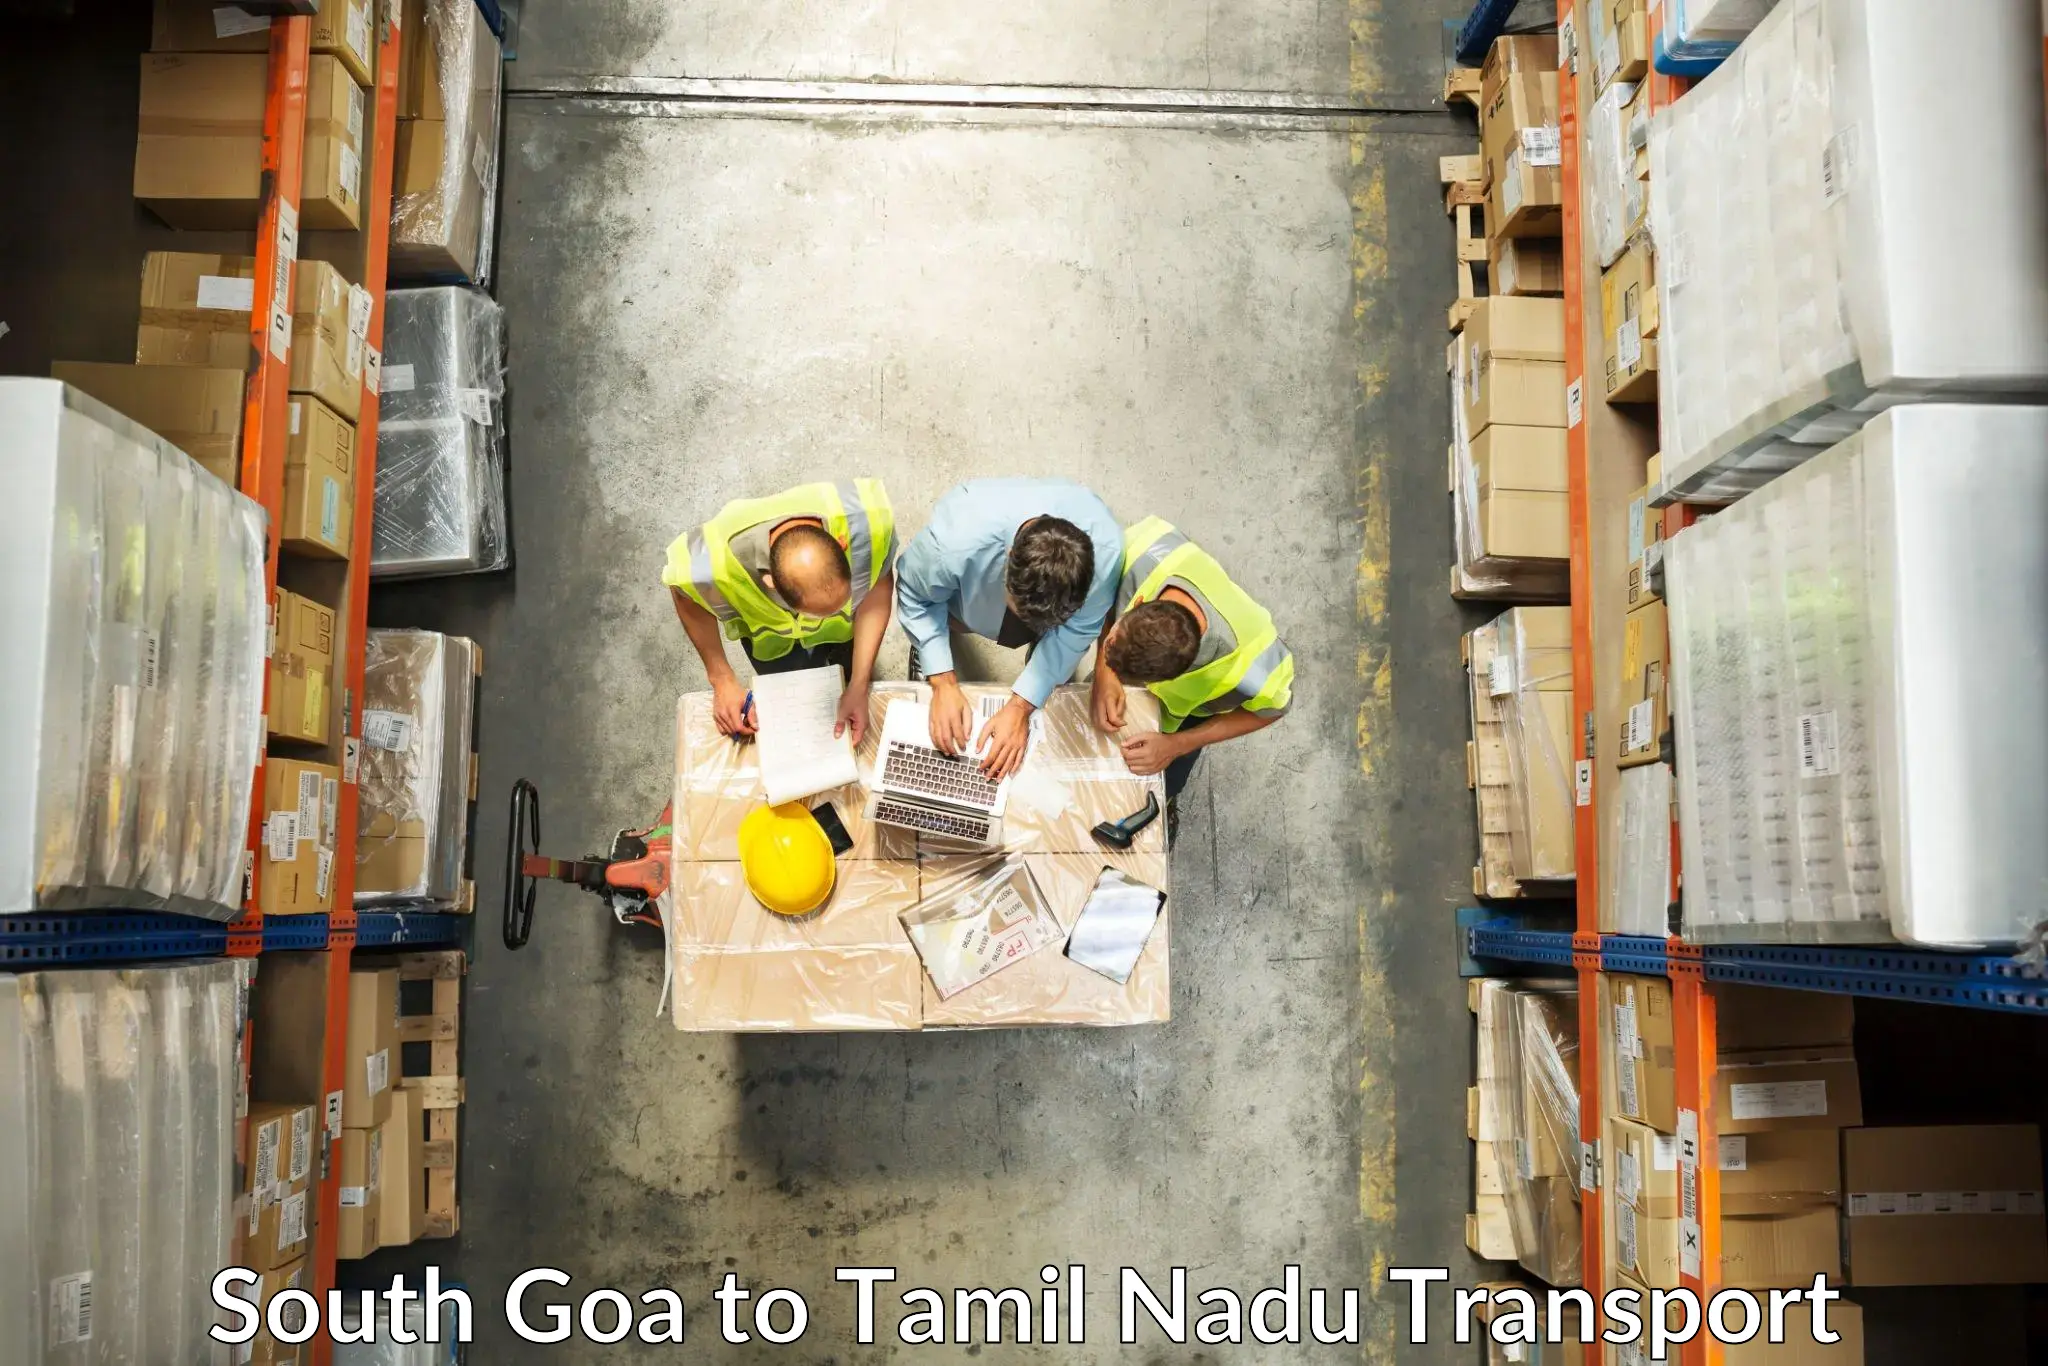 Two wheeler transport services South Goa to Sri Ramachandra Institute of Higher Education and Research Chennai